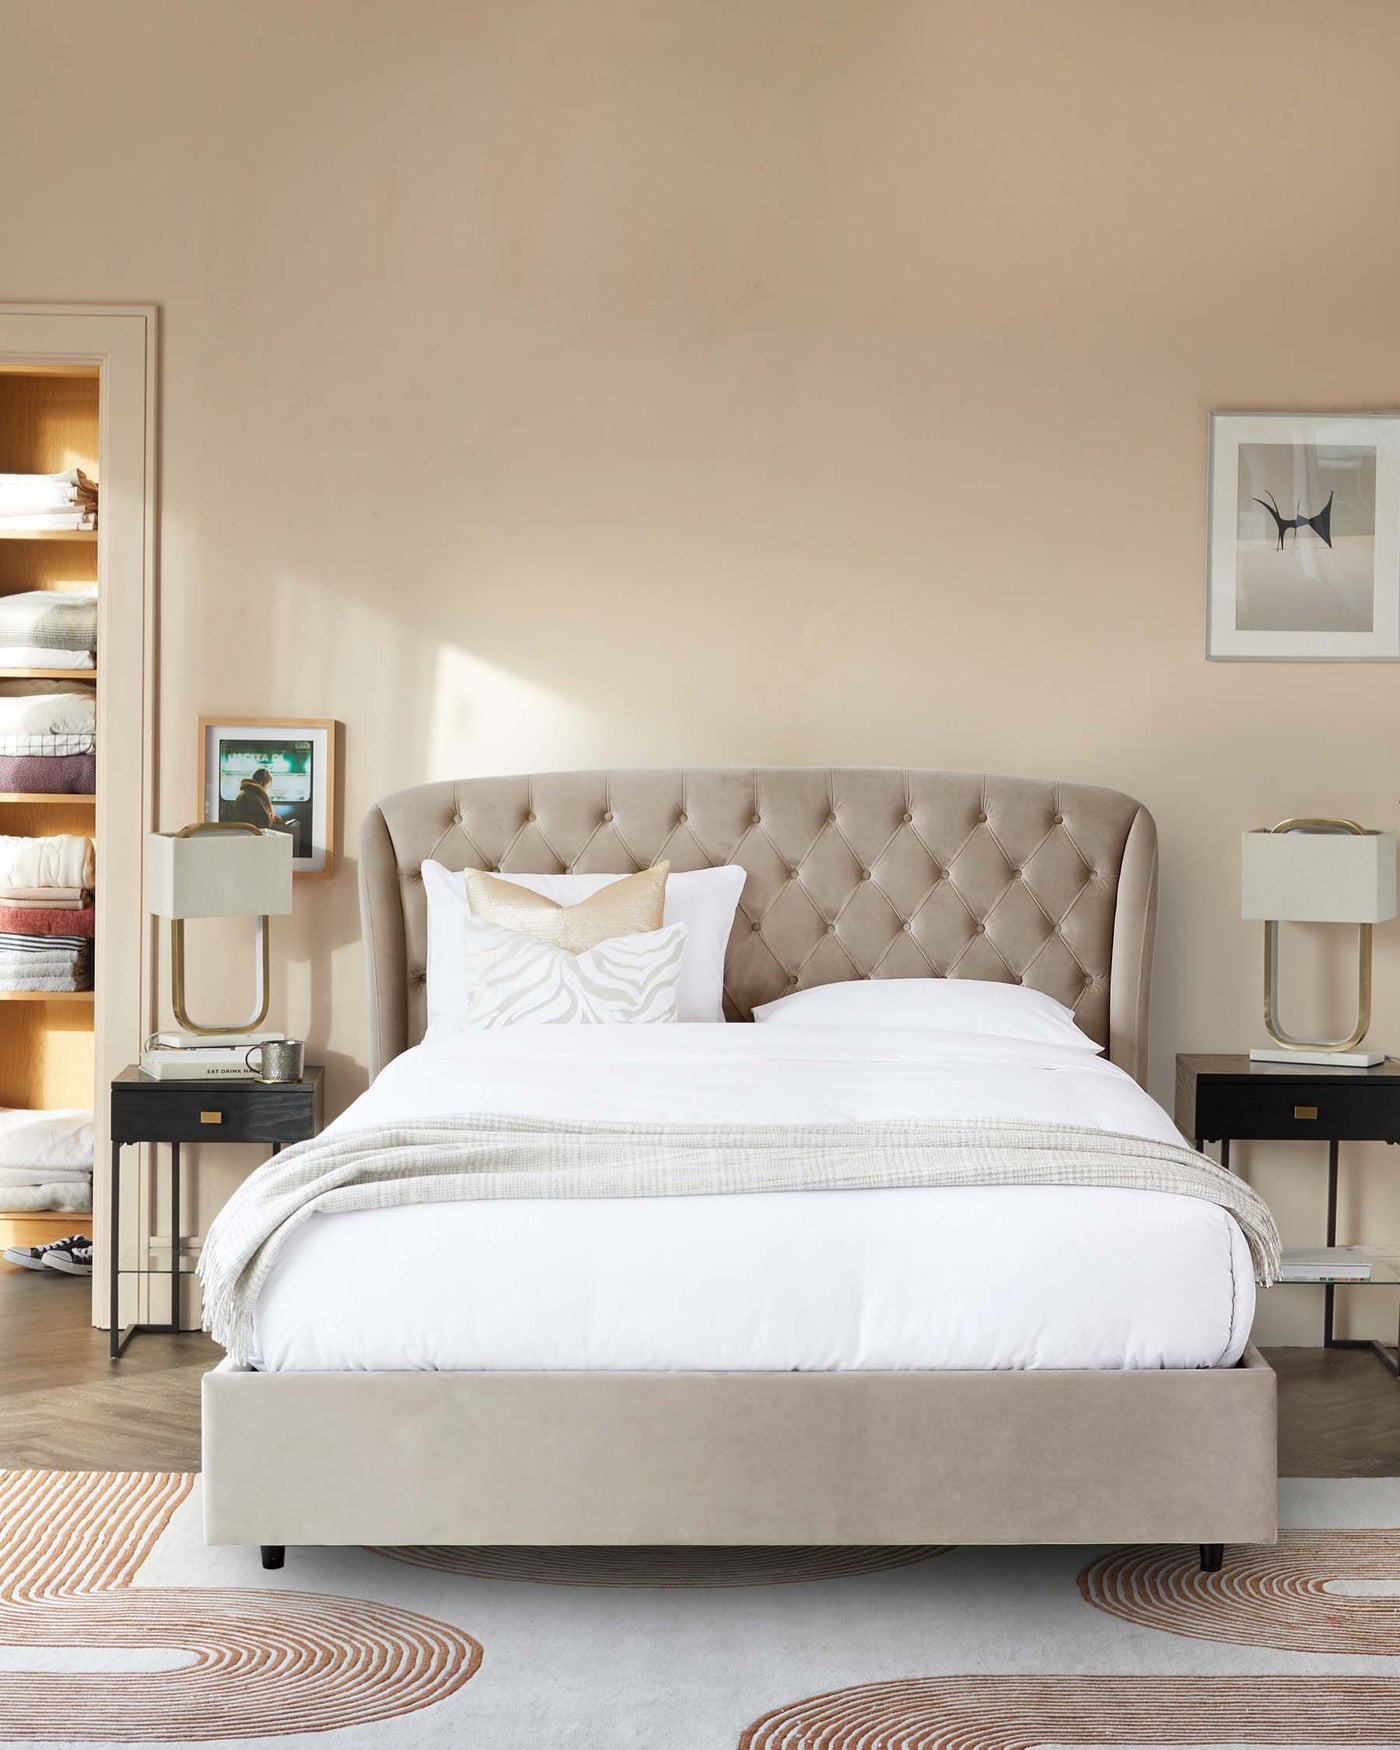 Elegant bedroom setup featuring a taupe upholstered queen-size bed with diamond tufted headboard and matching bench at the foot. Flanking the bed are two contemporary black nightstands with brass detailing, each adorned with a stylish lamp and minimalist decor. A selection of neatly arranged shelves with towels and linens is visible to the left, while an area rug with warm-toned swirl patterns completes the scene.